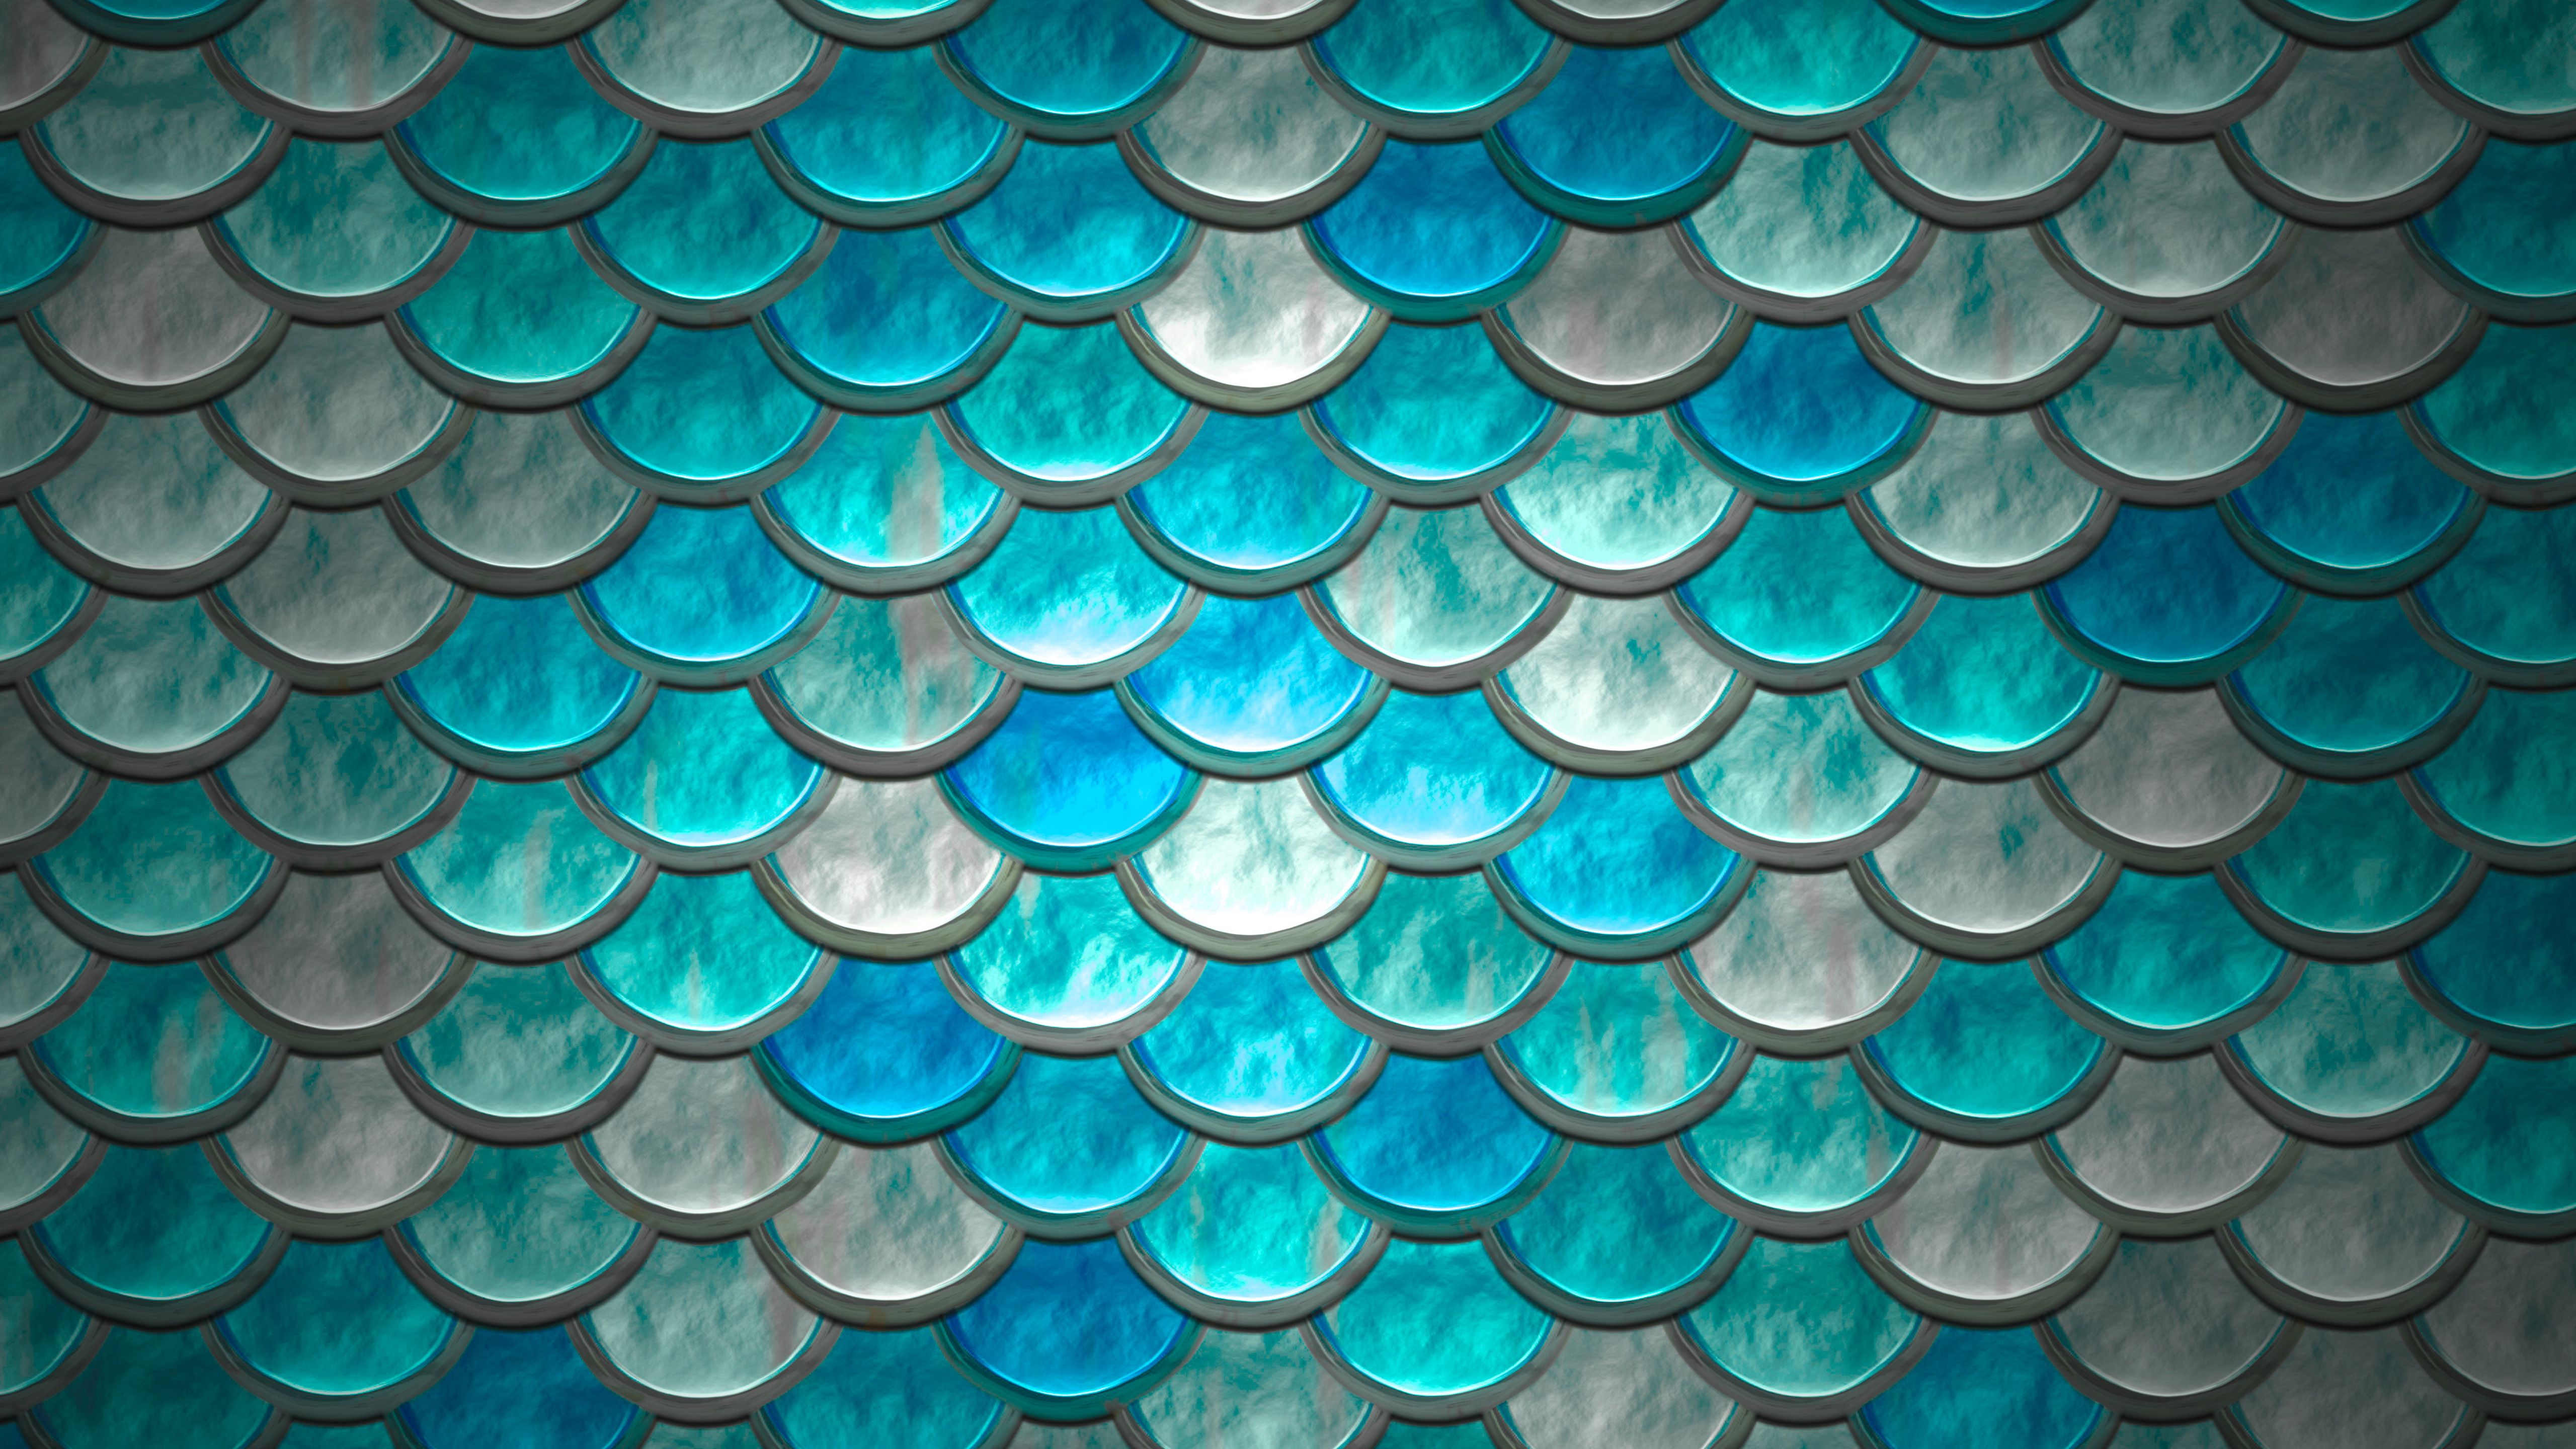 General 5120x2880 abstract mosaic blue turquoise cyan scales pattern